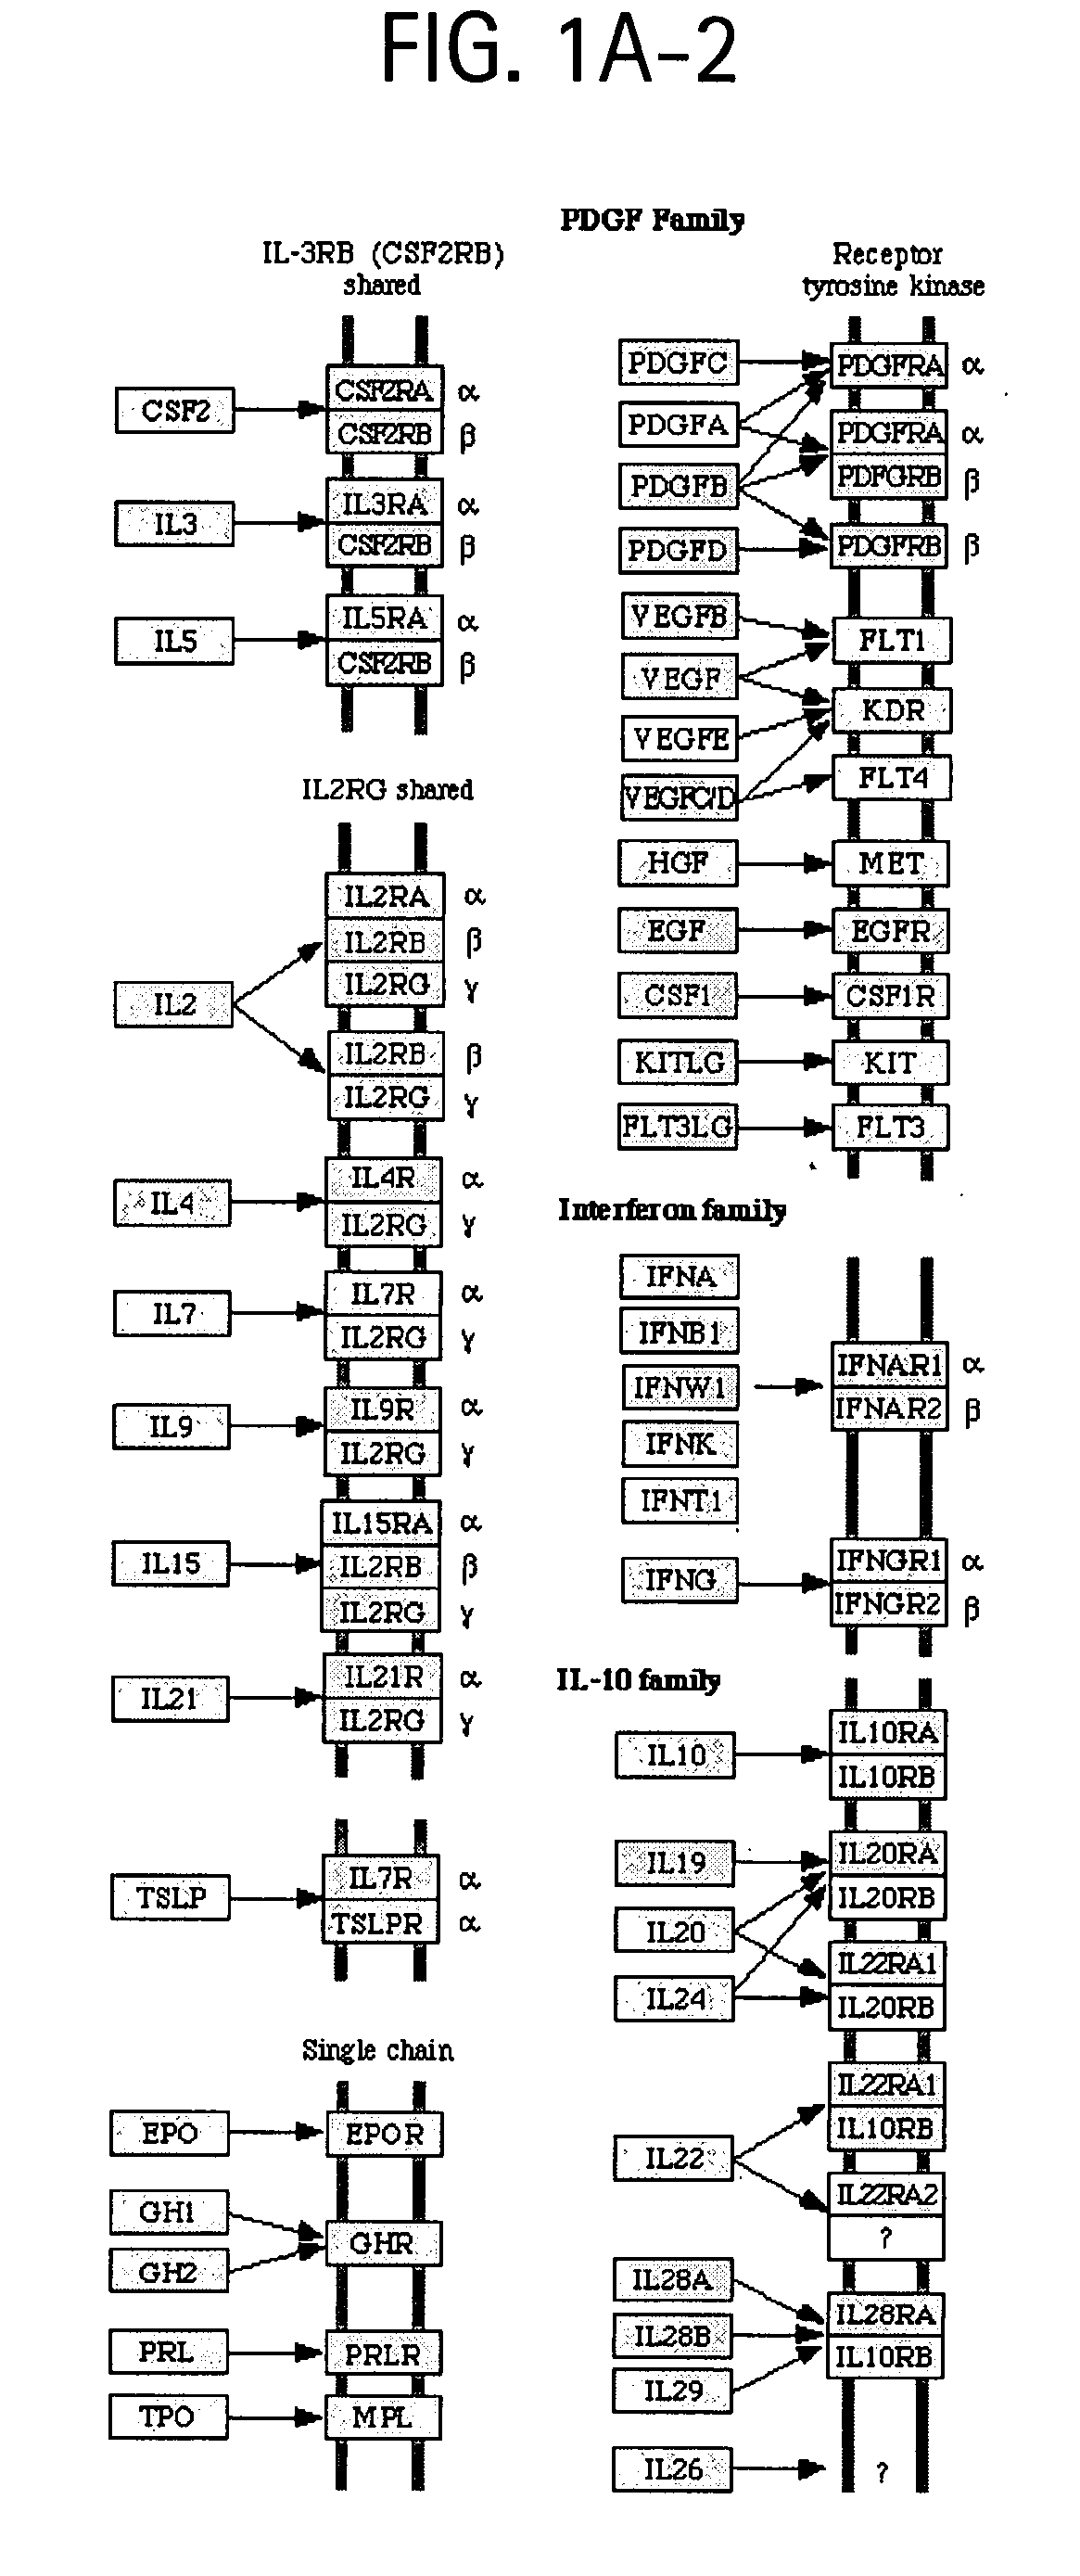 Osteoporosis associated markers and methods of use thereof